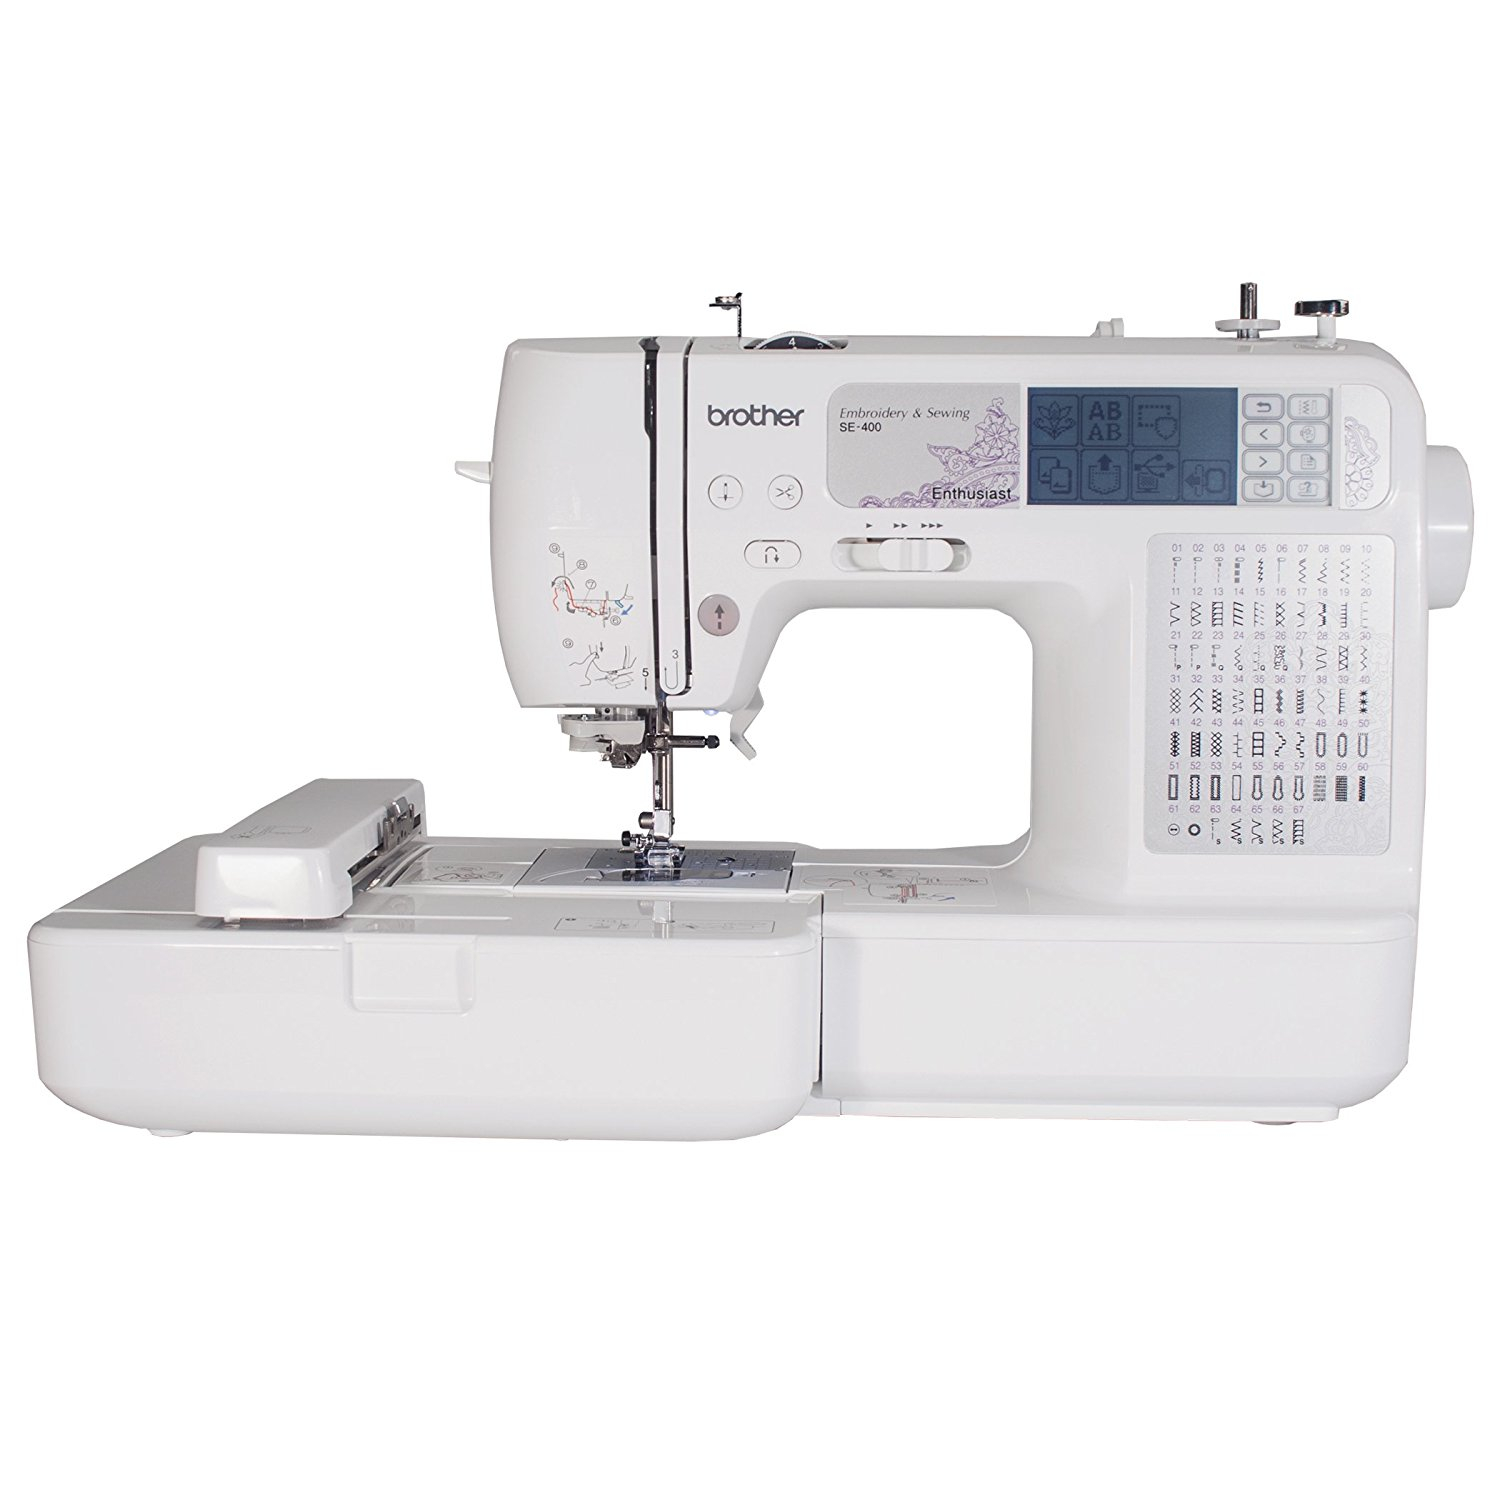 Brother Sewing Machine Embroidery Patterns Brother Se400 Sewing Machine Directory